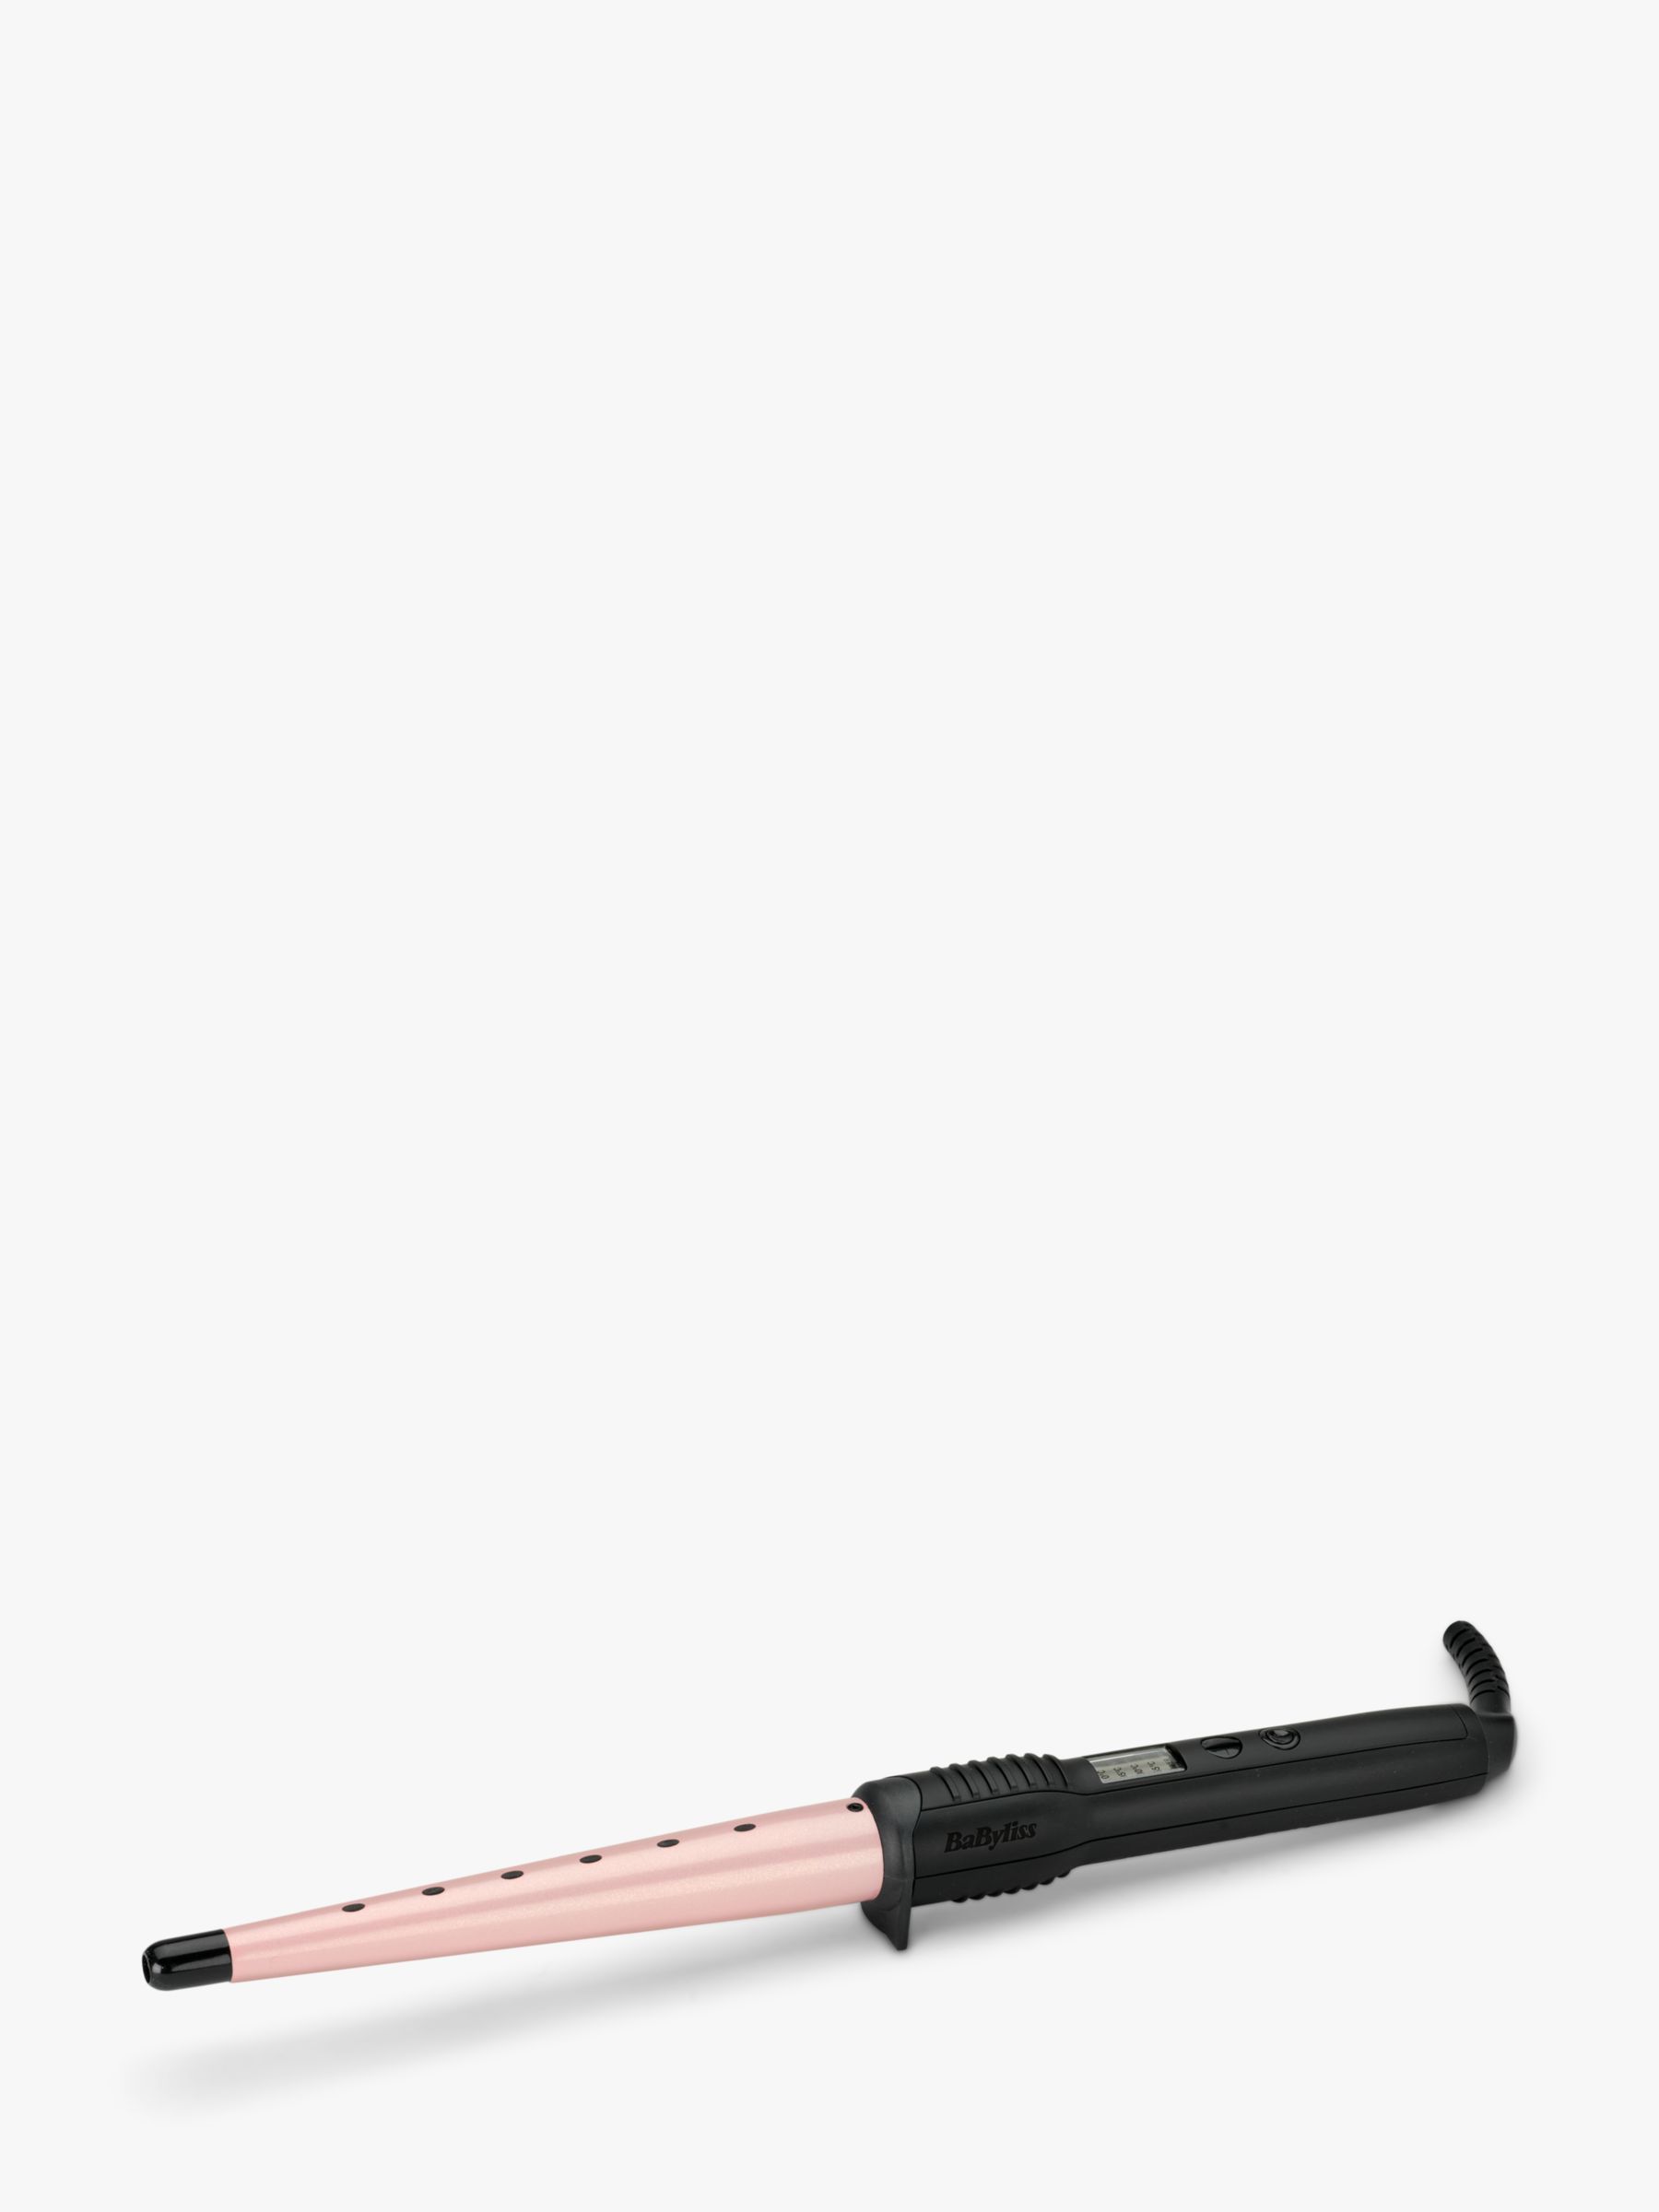 BaByliss Hair Curling Wand, Rose Blush